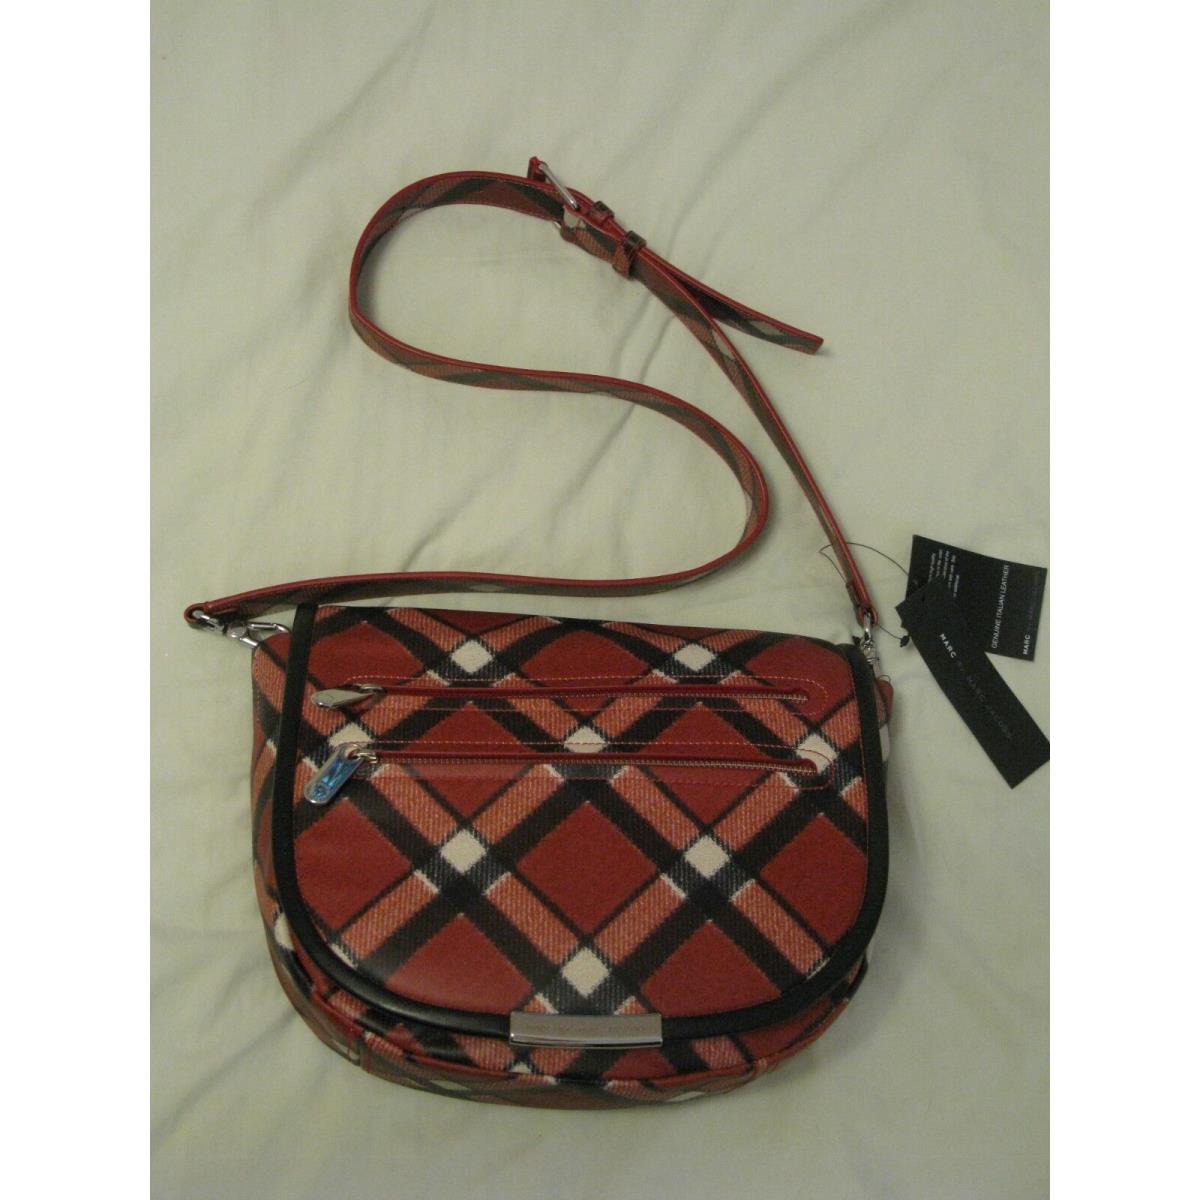 Marc Jacobs Luna Bag `cambridge Red` Plaid Leather Beautiful Crossbody Style